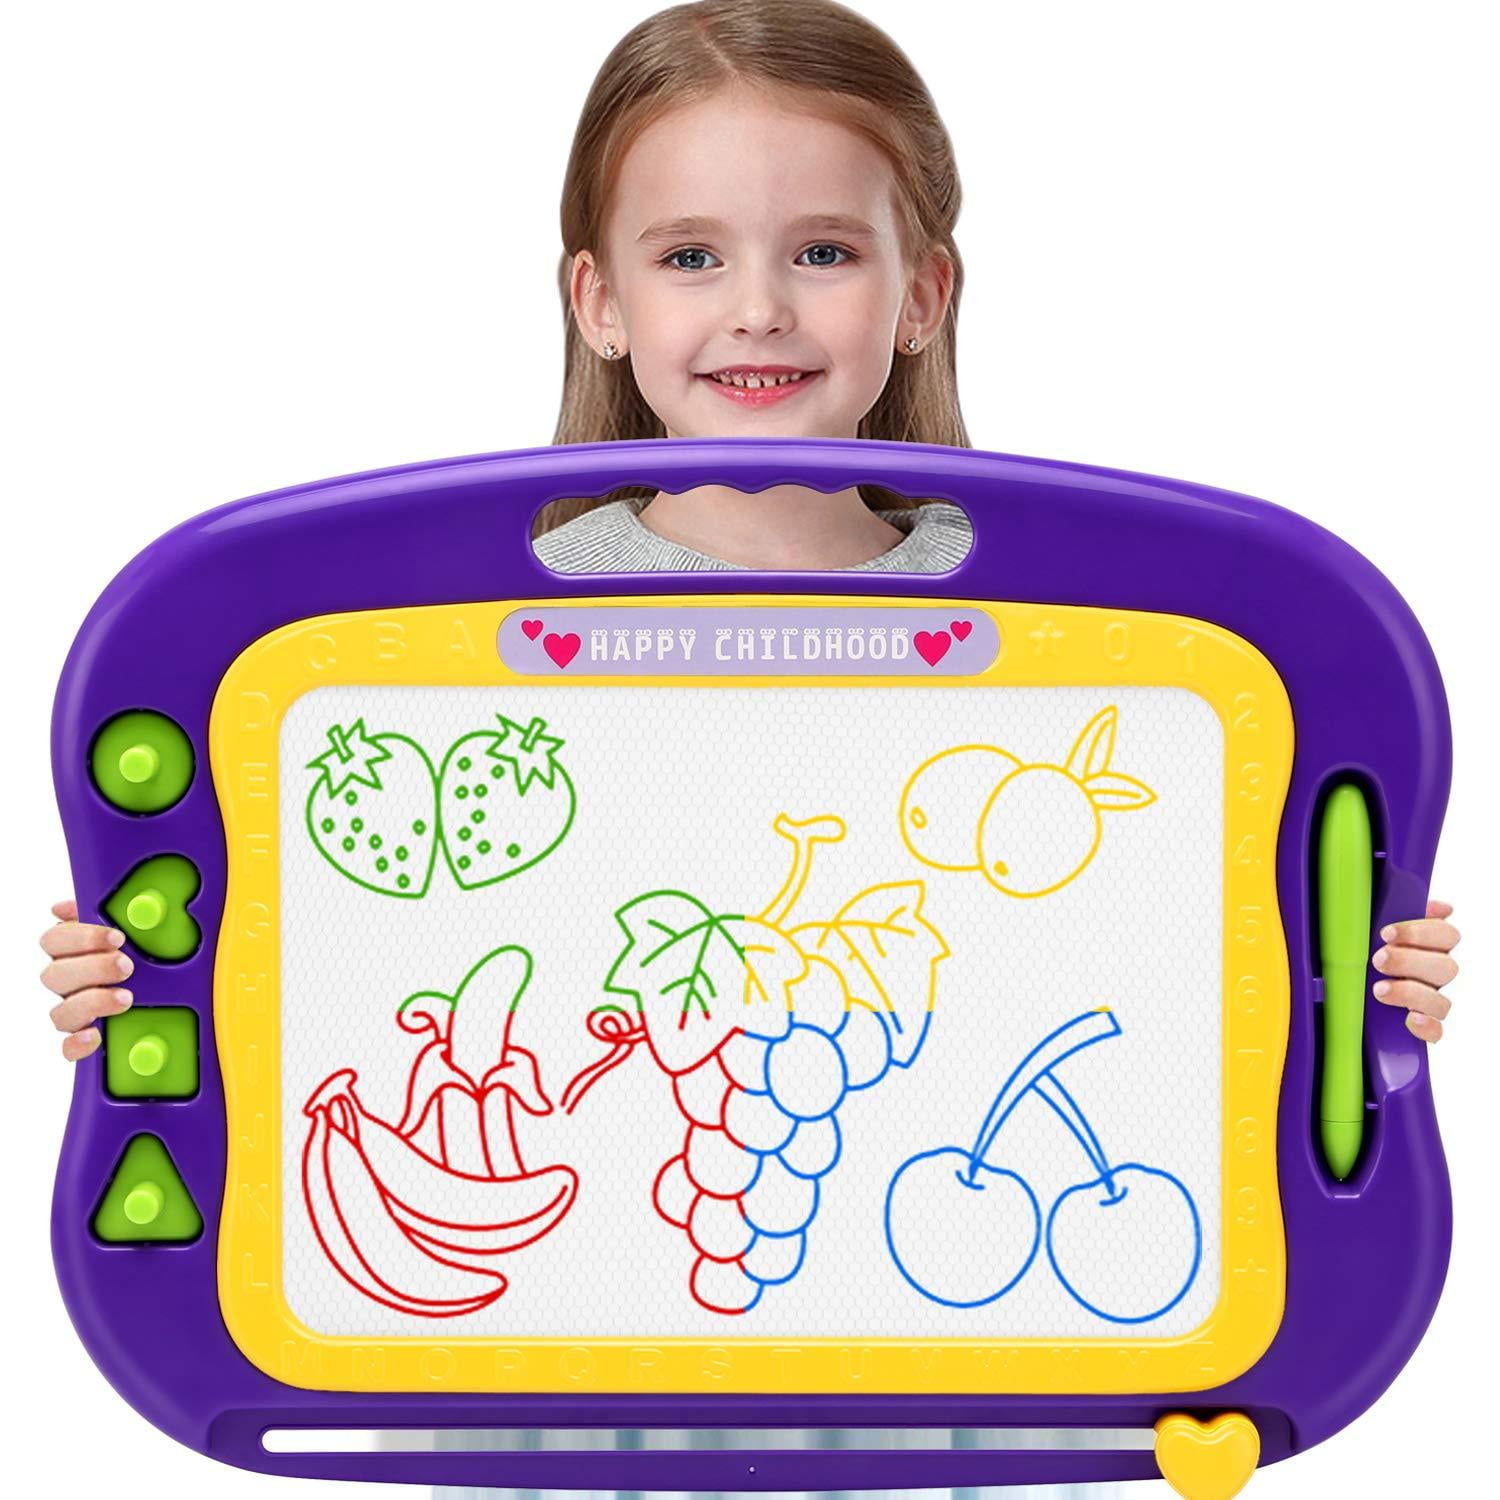 Year Old Magnetic Drawing Board Educational Toys Games Gifts Birthday Age 3 